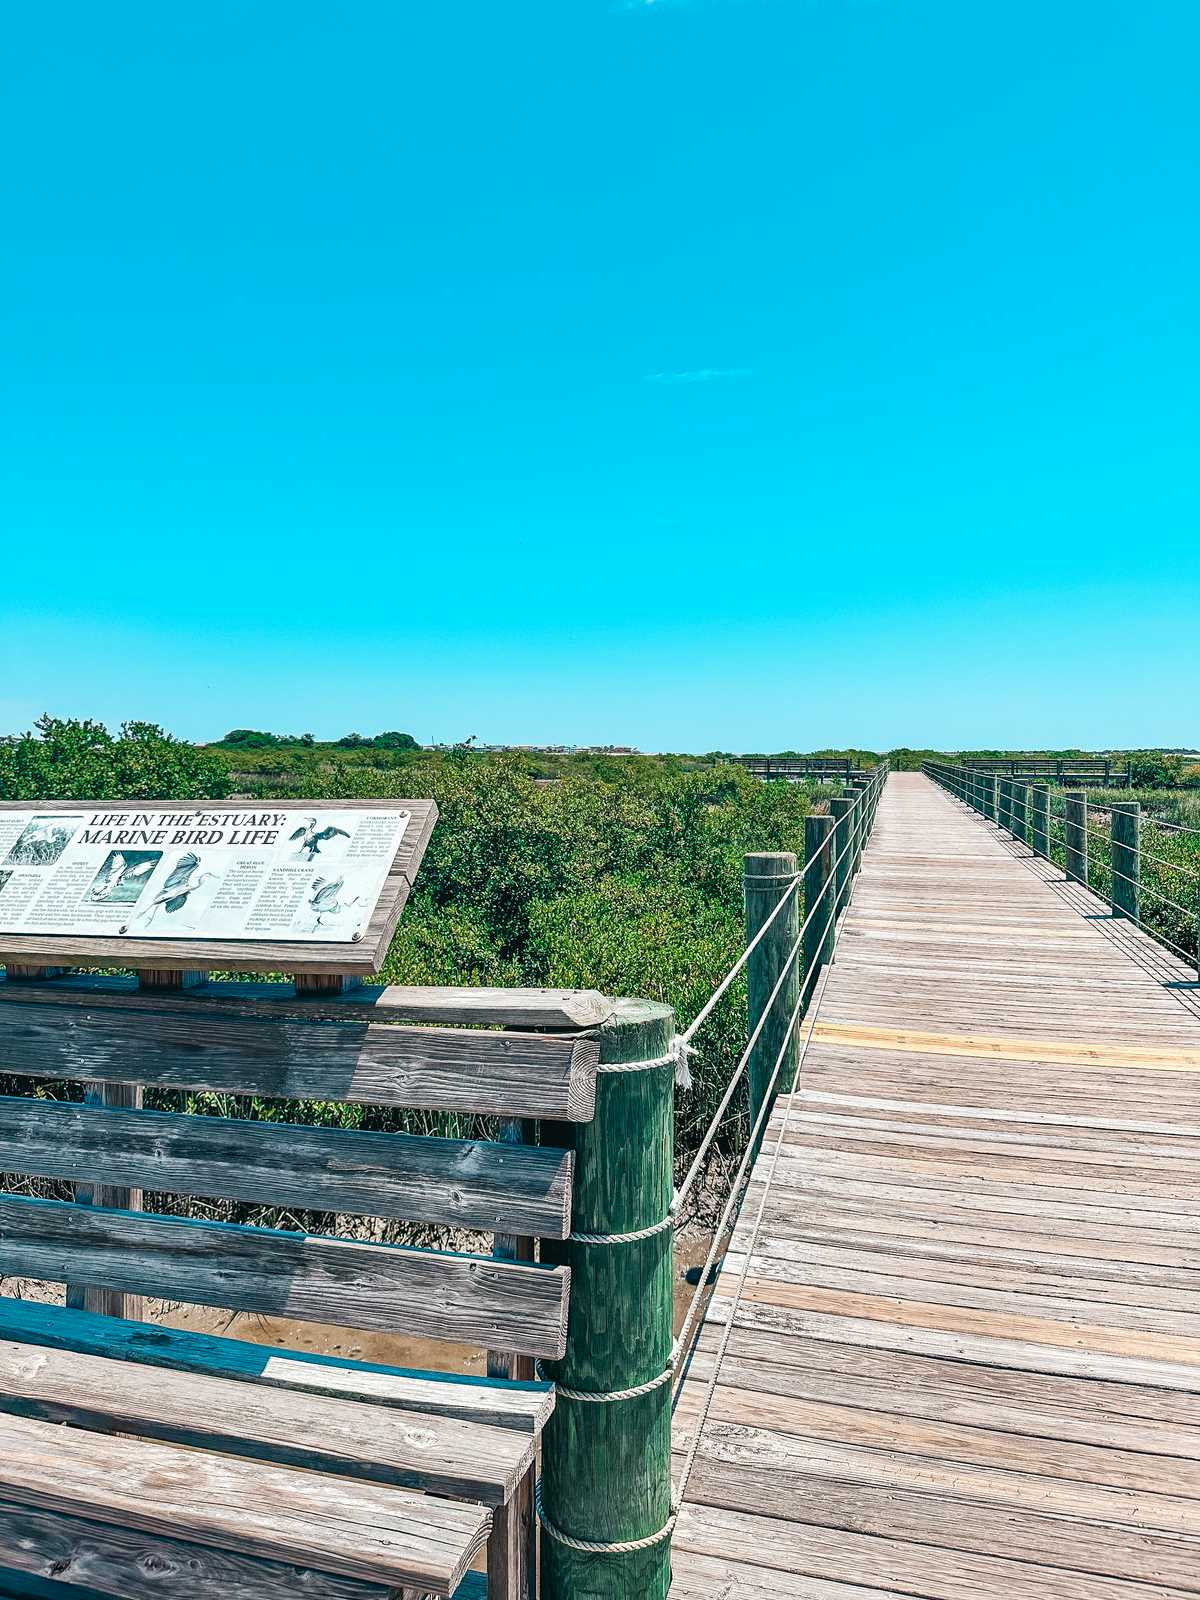 Boardwalk at the Fountain of Youth in St. Augustine